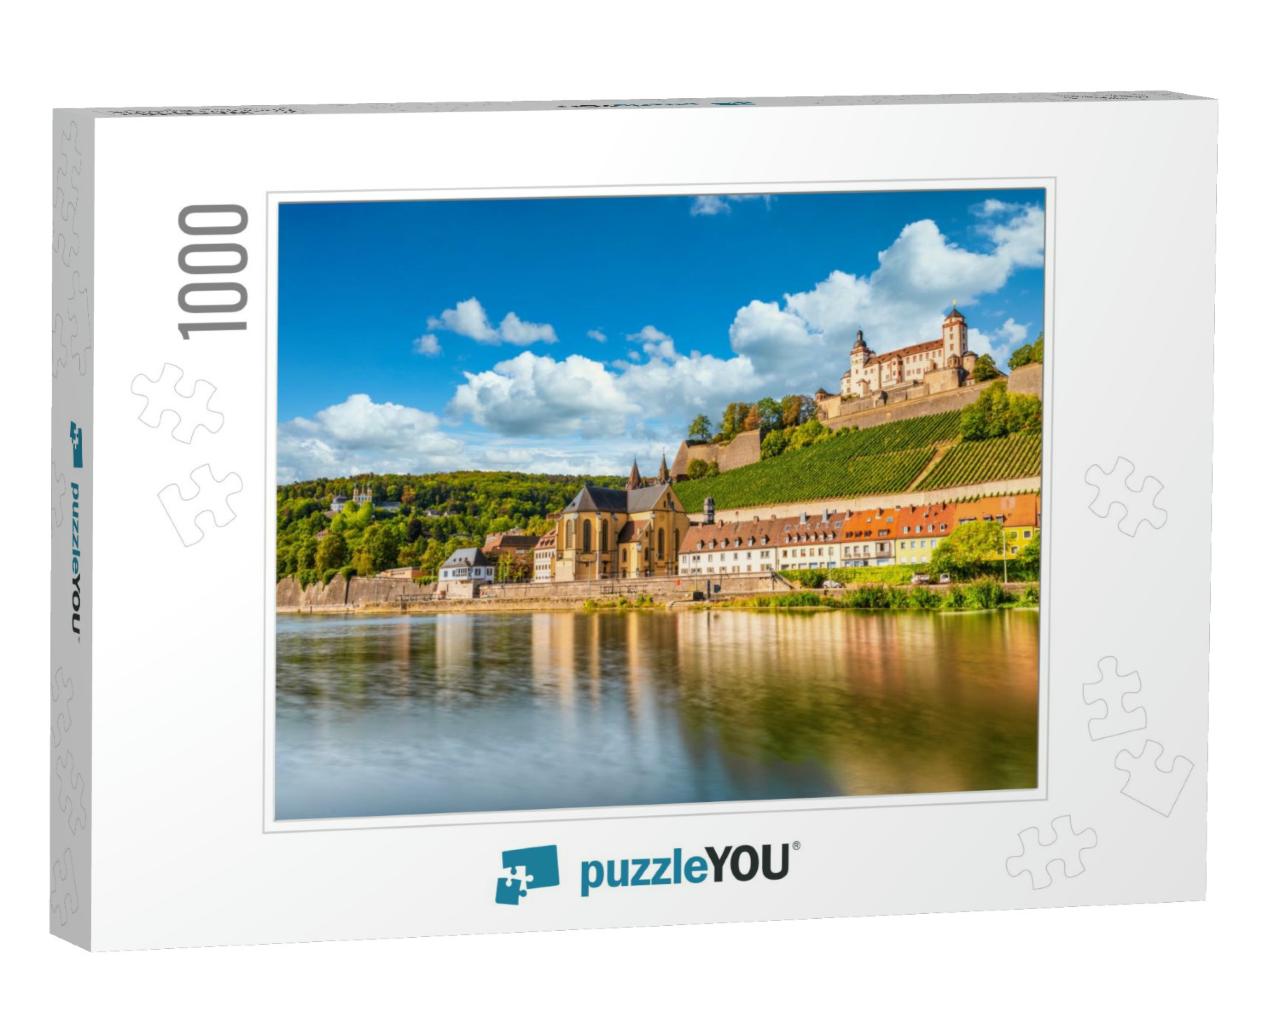 Marienberg Fortress Near He River Main in Wurzburg, Bavar... Jigsaw Puzzle with 1000 pieces